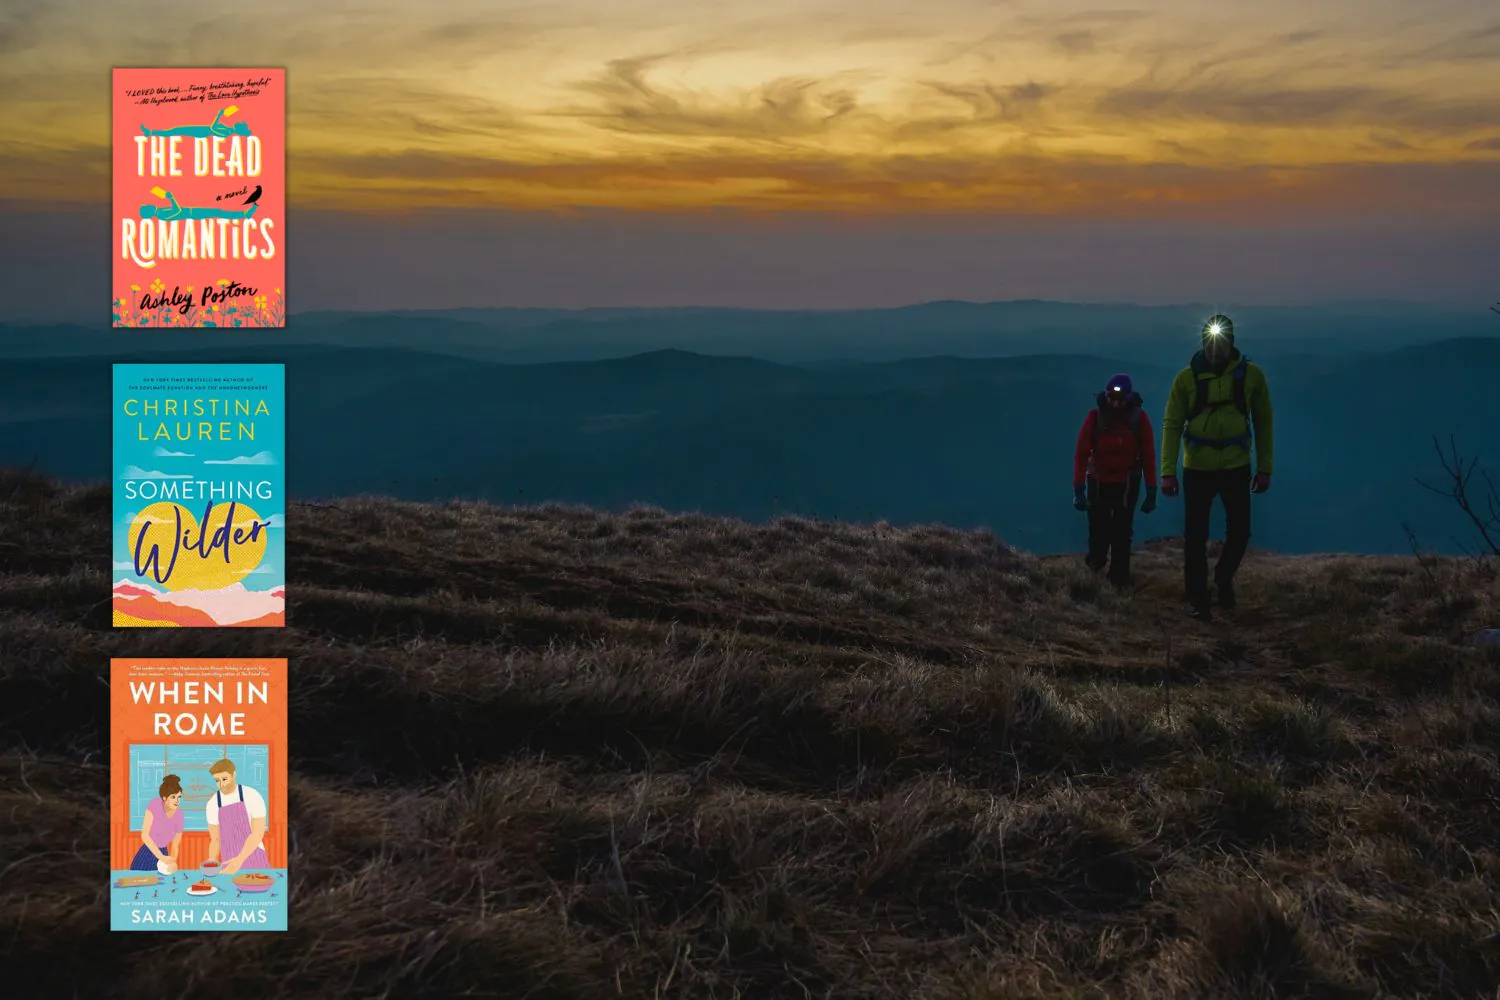 Couple hiking in isolated open area with 3 books overlaid